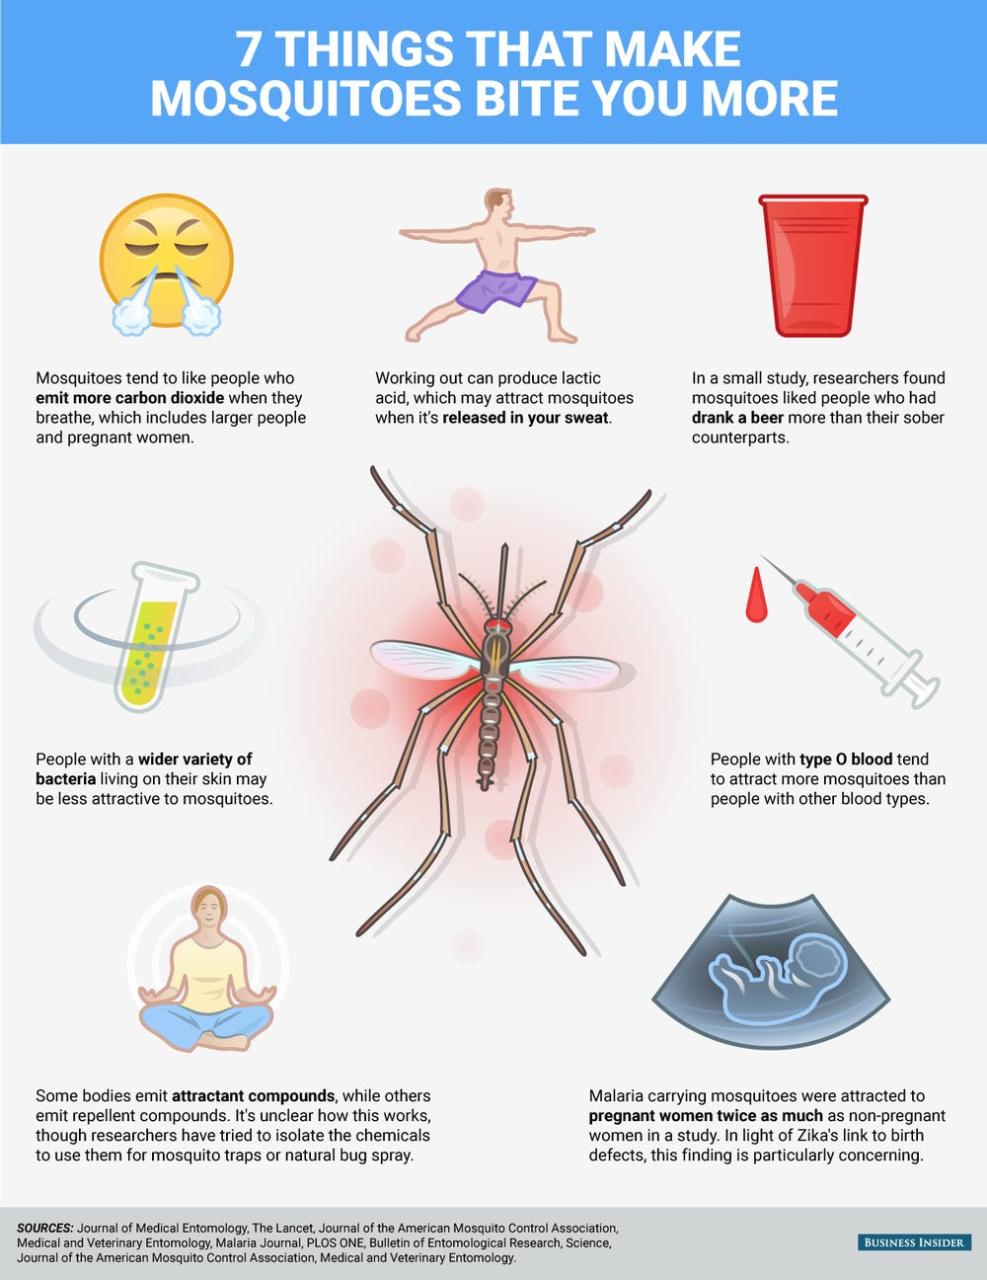 7 Things That Make Mosquitoes Bite You More